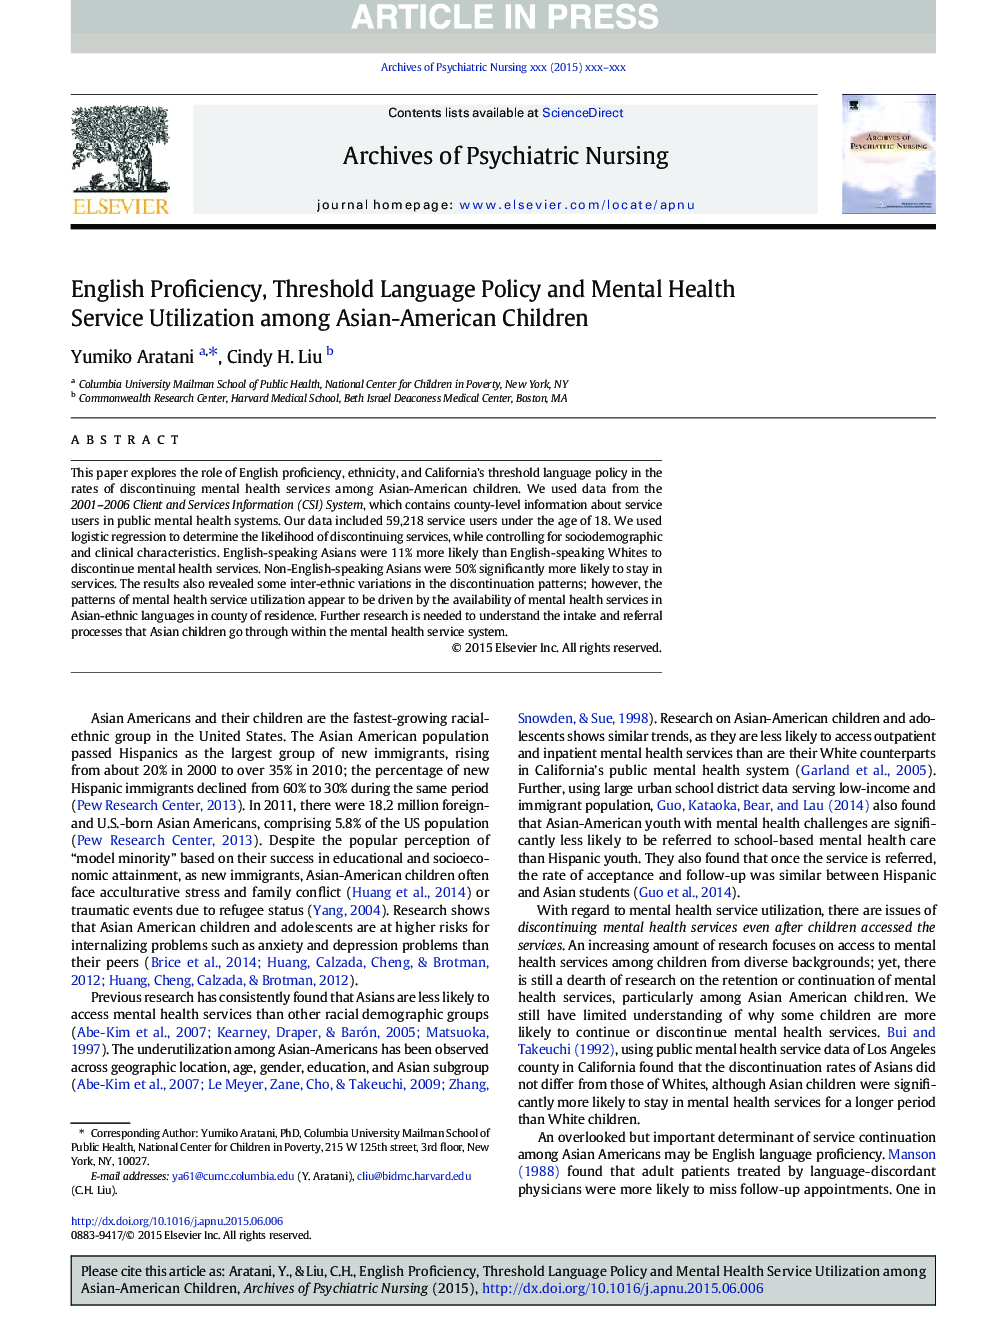 English Proficiency, Threshold Language Policy and Mental Health Service Utilization among Asian-American Children